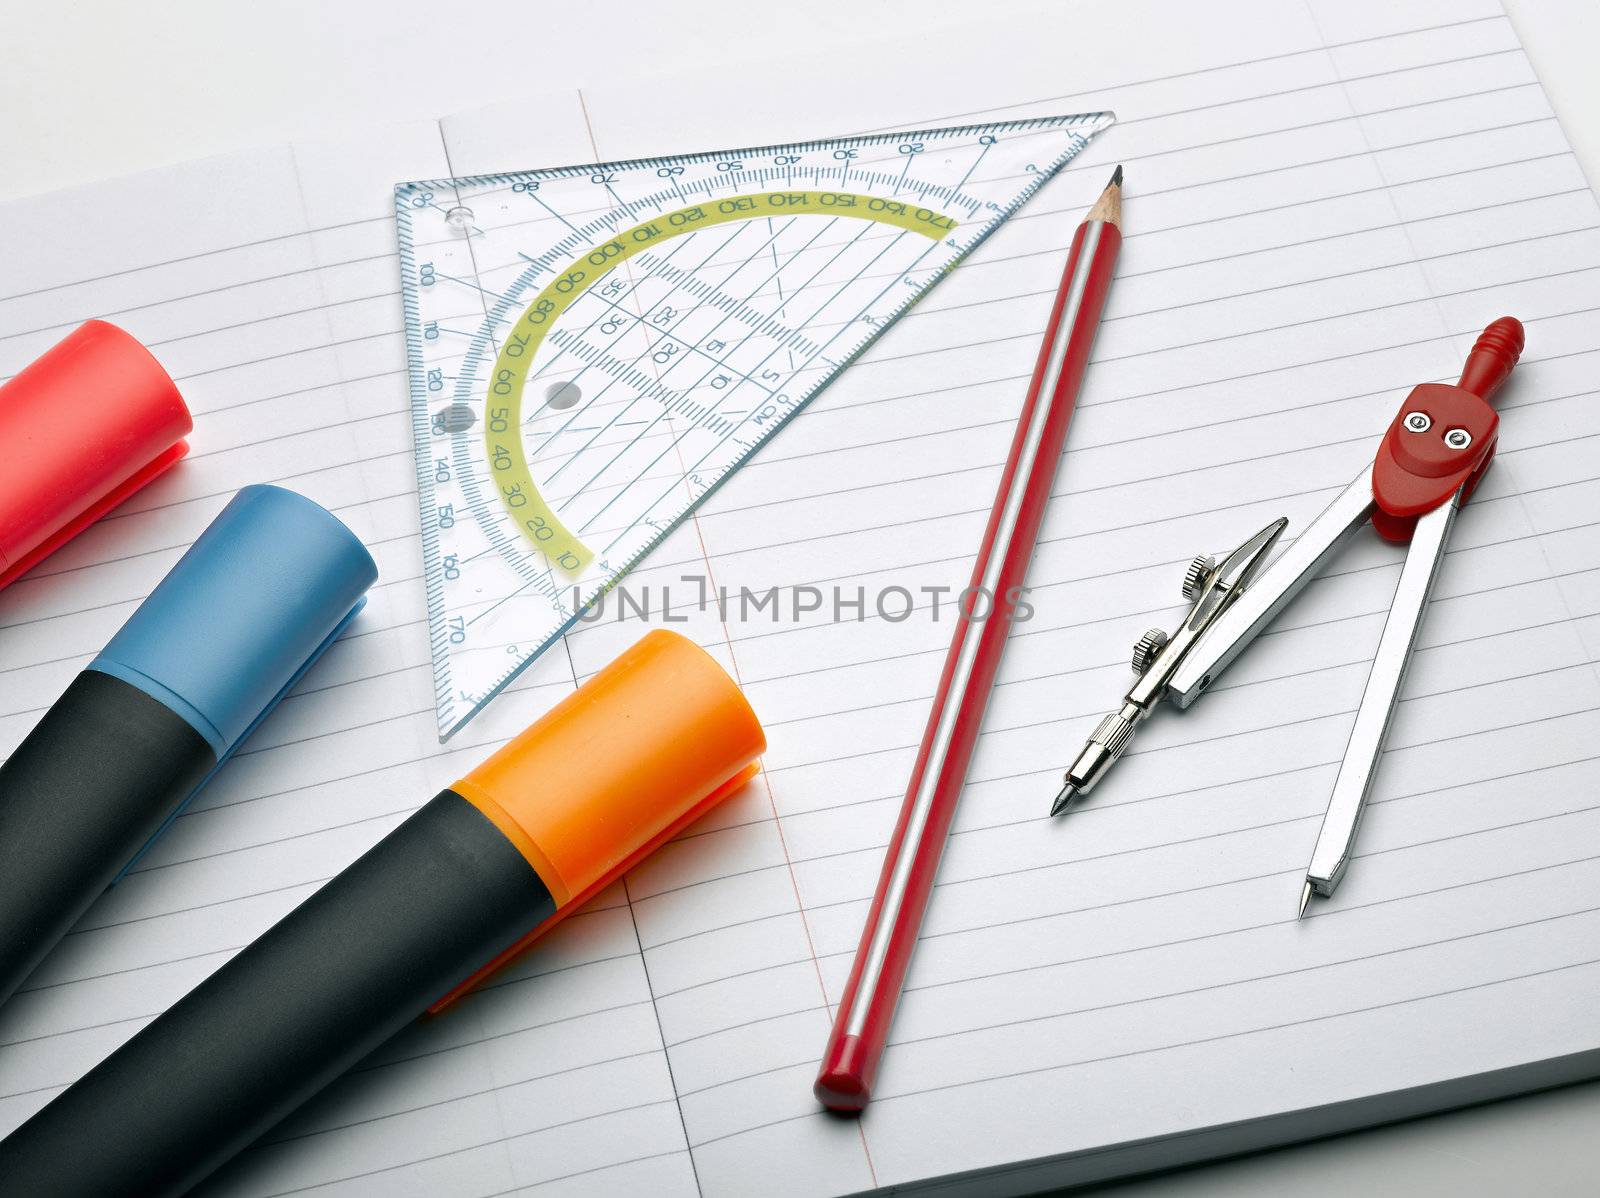 Writing tools and compass by pbombaert